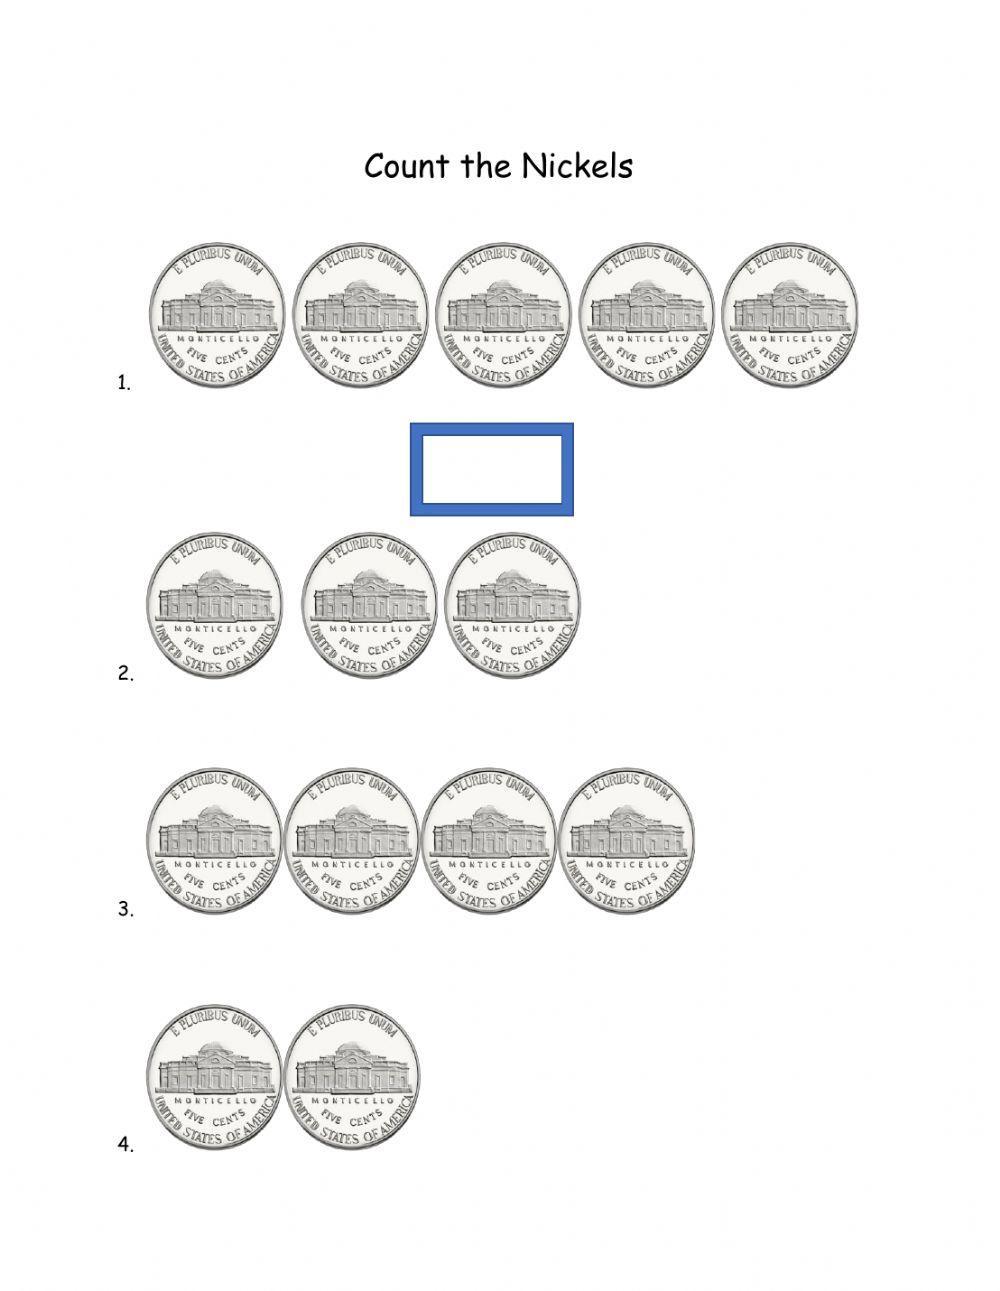 Counting Nickels